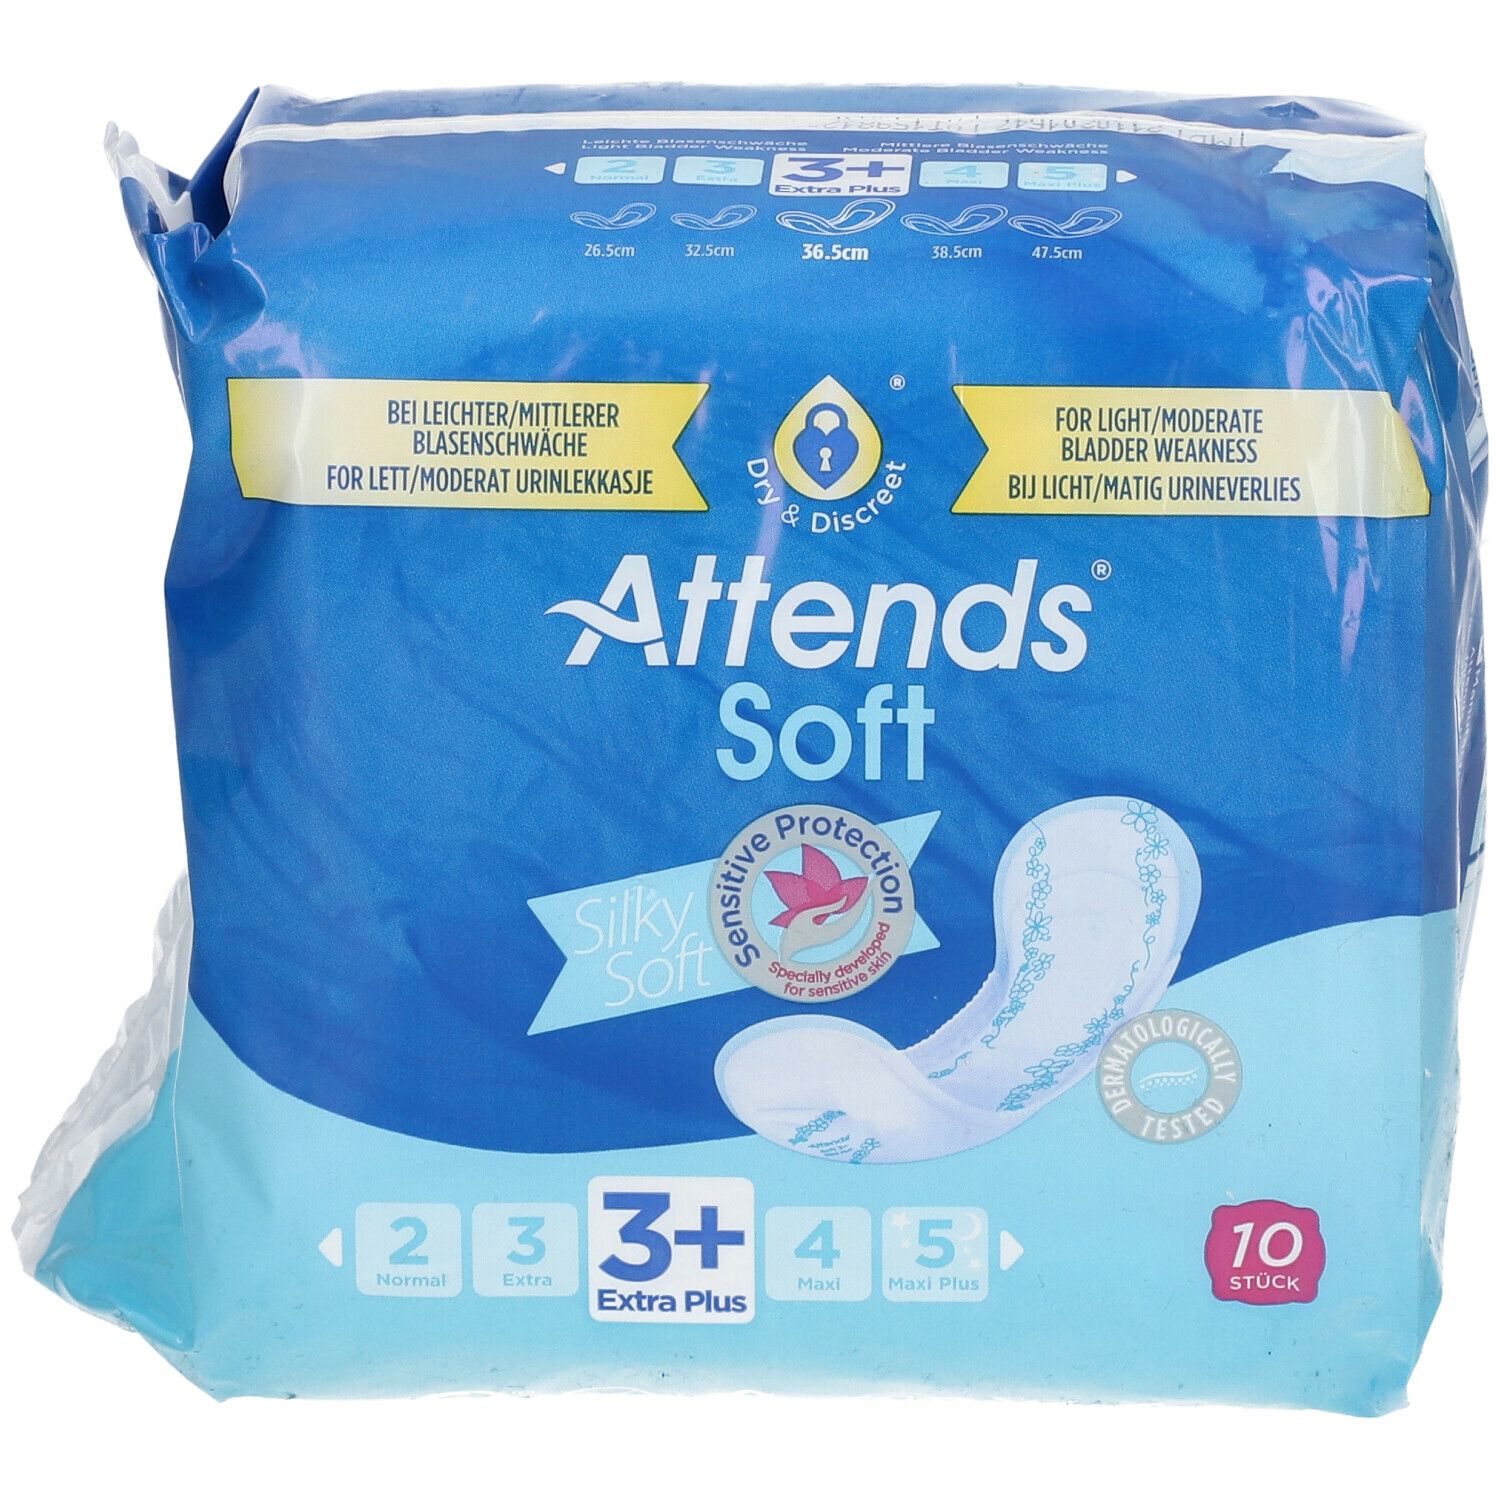 Attends Soft 3+ Extra Plus